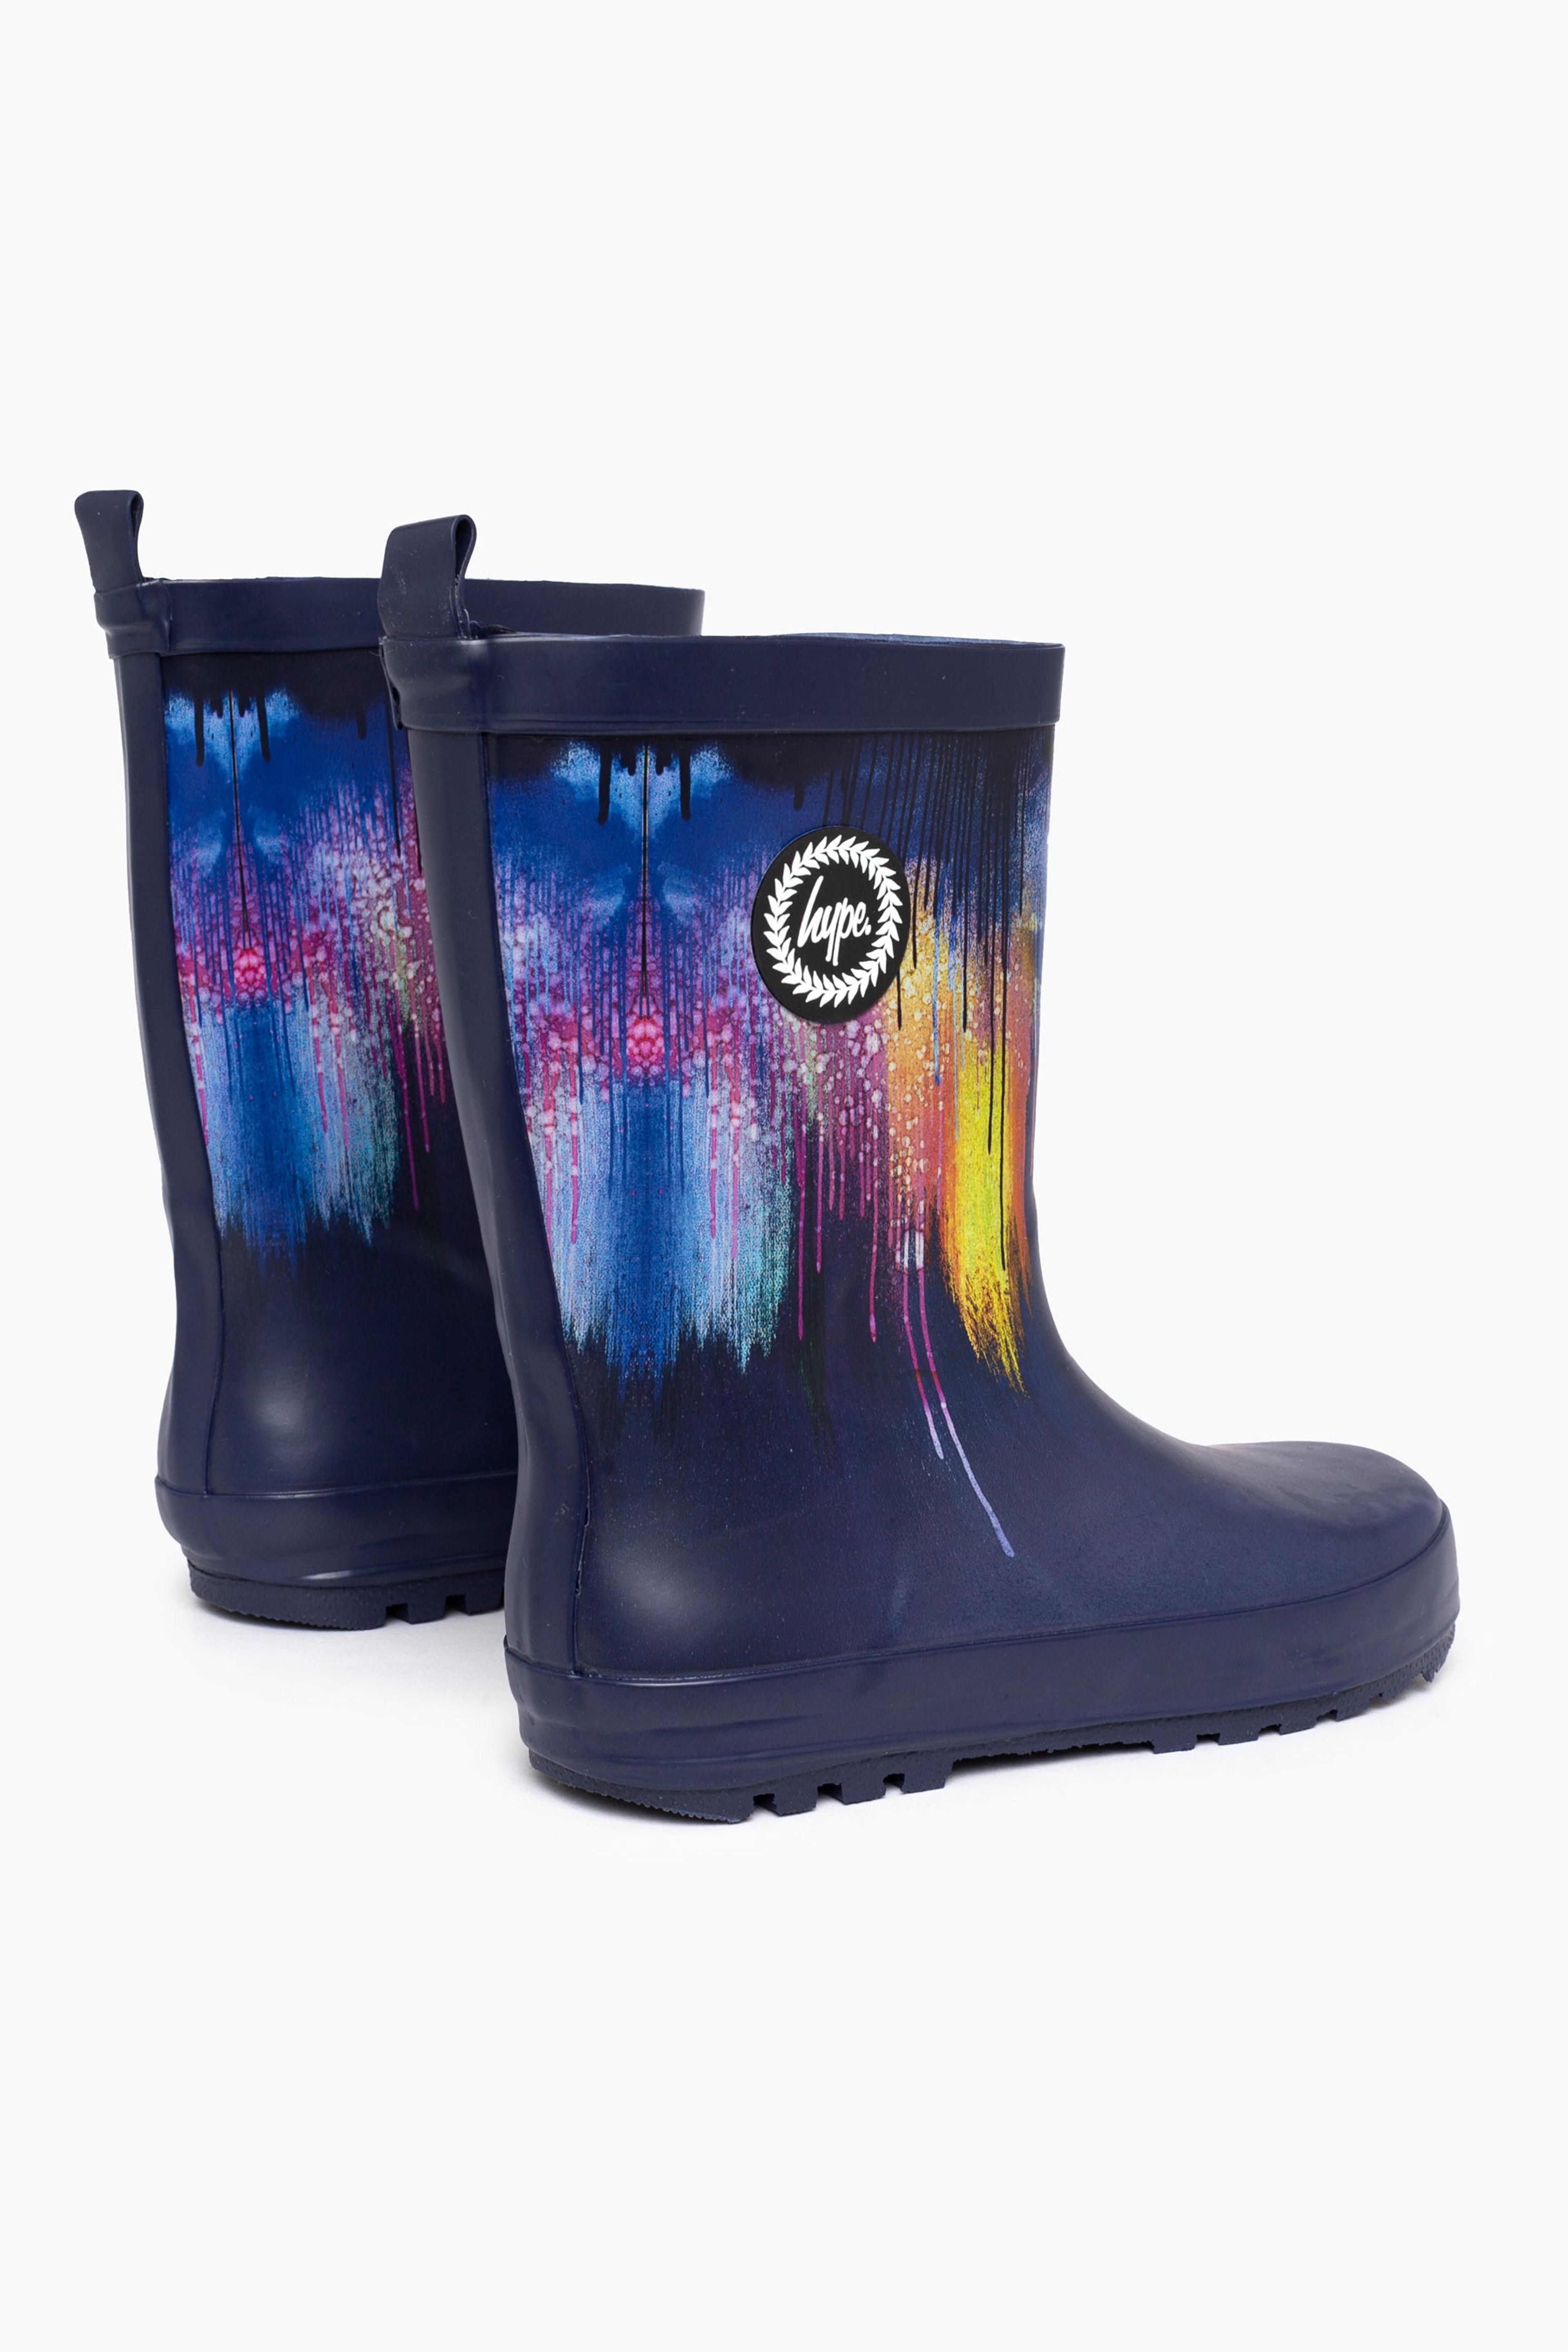 Alternate View 1 of HYPE KIDS UNISEX NAVY WATERCOLOUR DRIPS CREST WELLIES